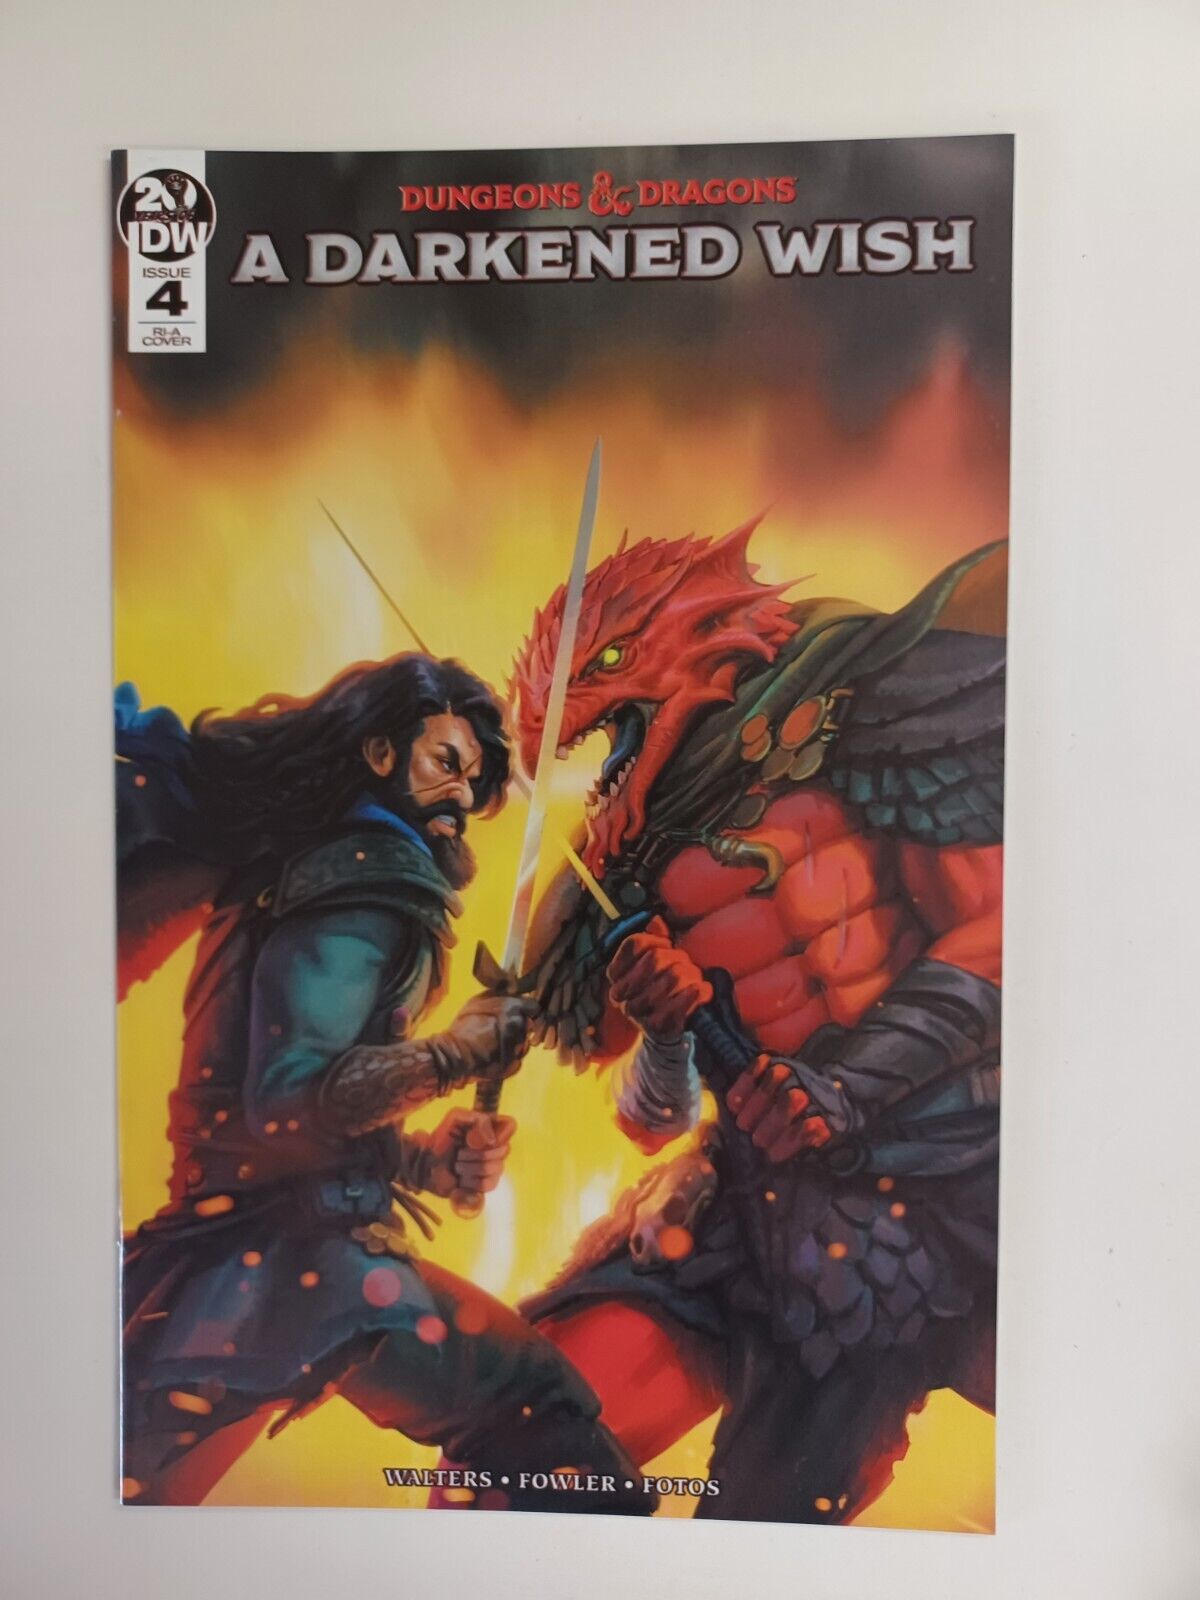 Dungeons and Dragons A Darkened Wish #4  - 1:10 RI-A Variant -  IDW -  2020 - NM